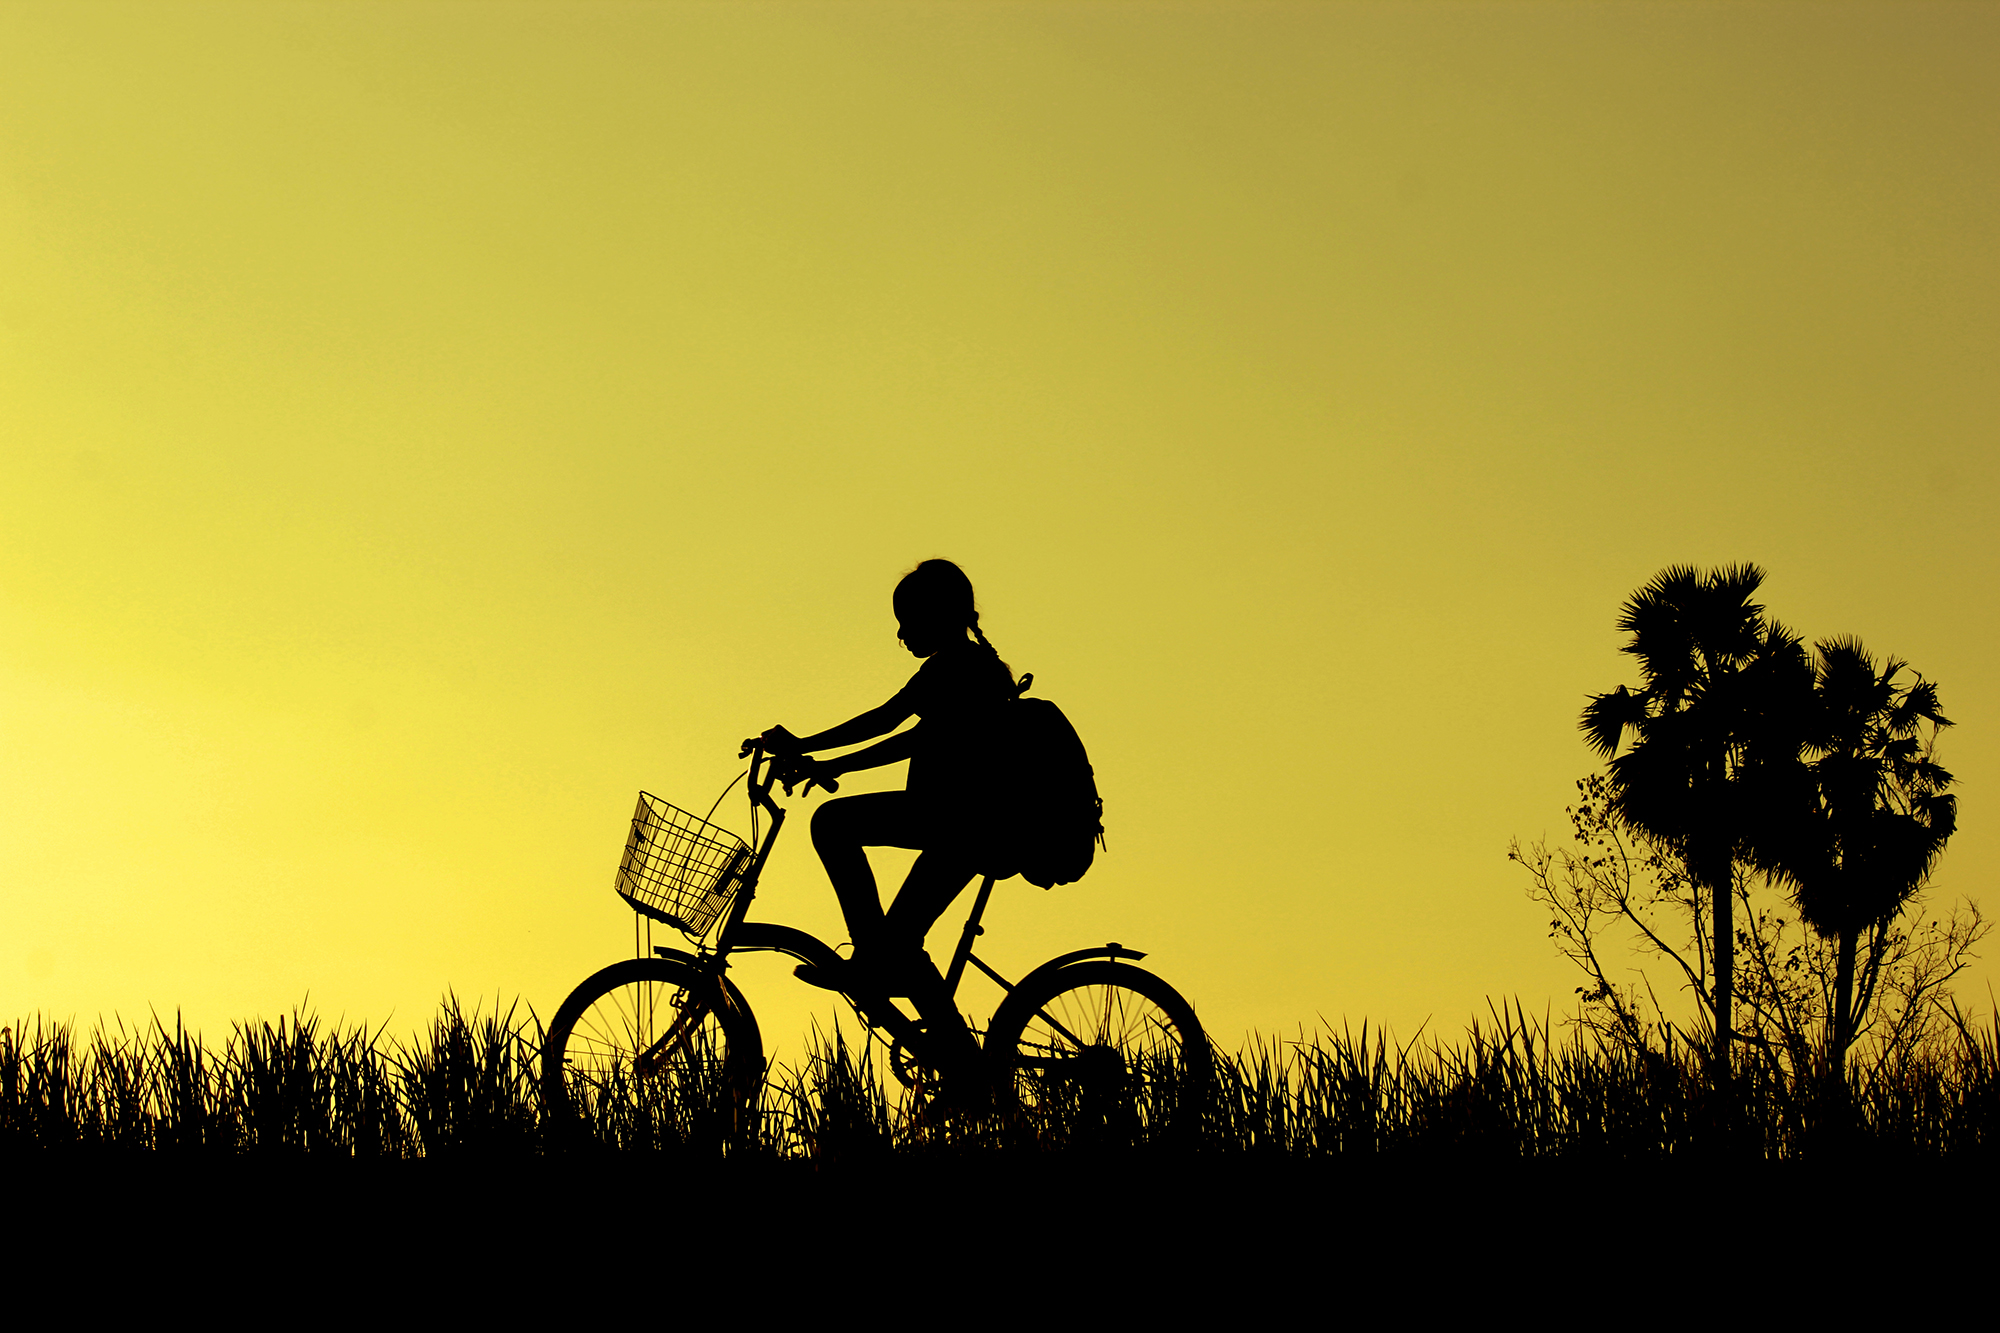 Silhouette Girl Riding Bicycle On Grassy Field Against Sky During Sunset